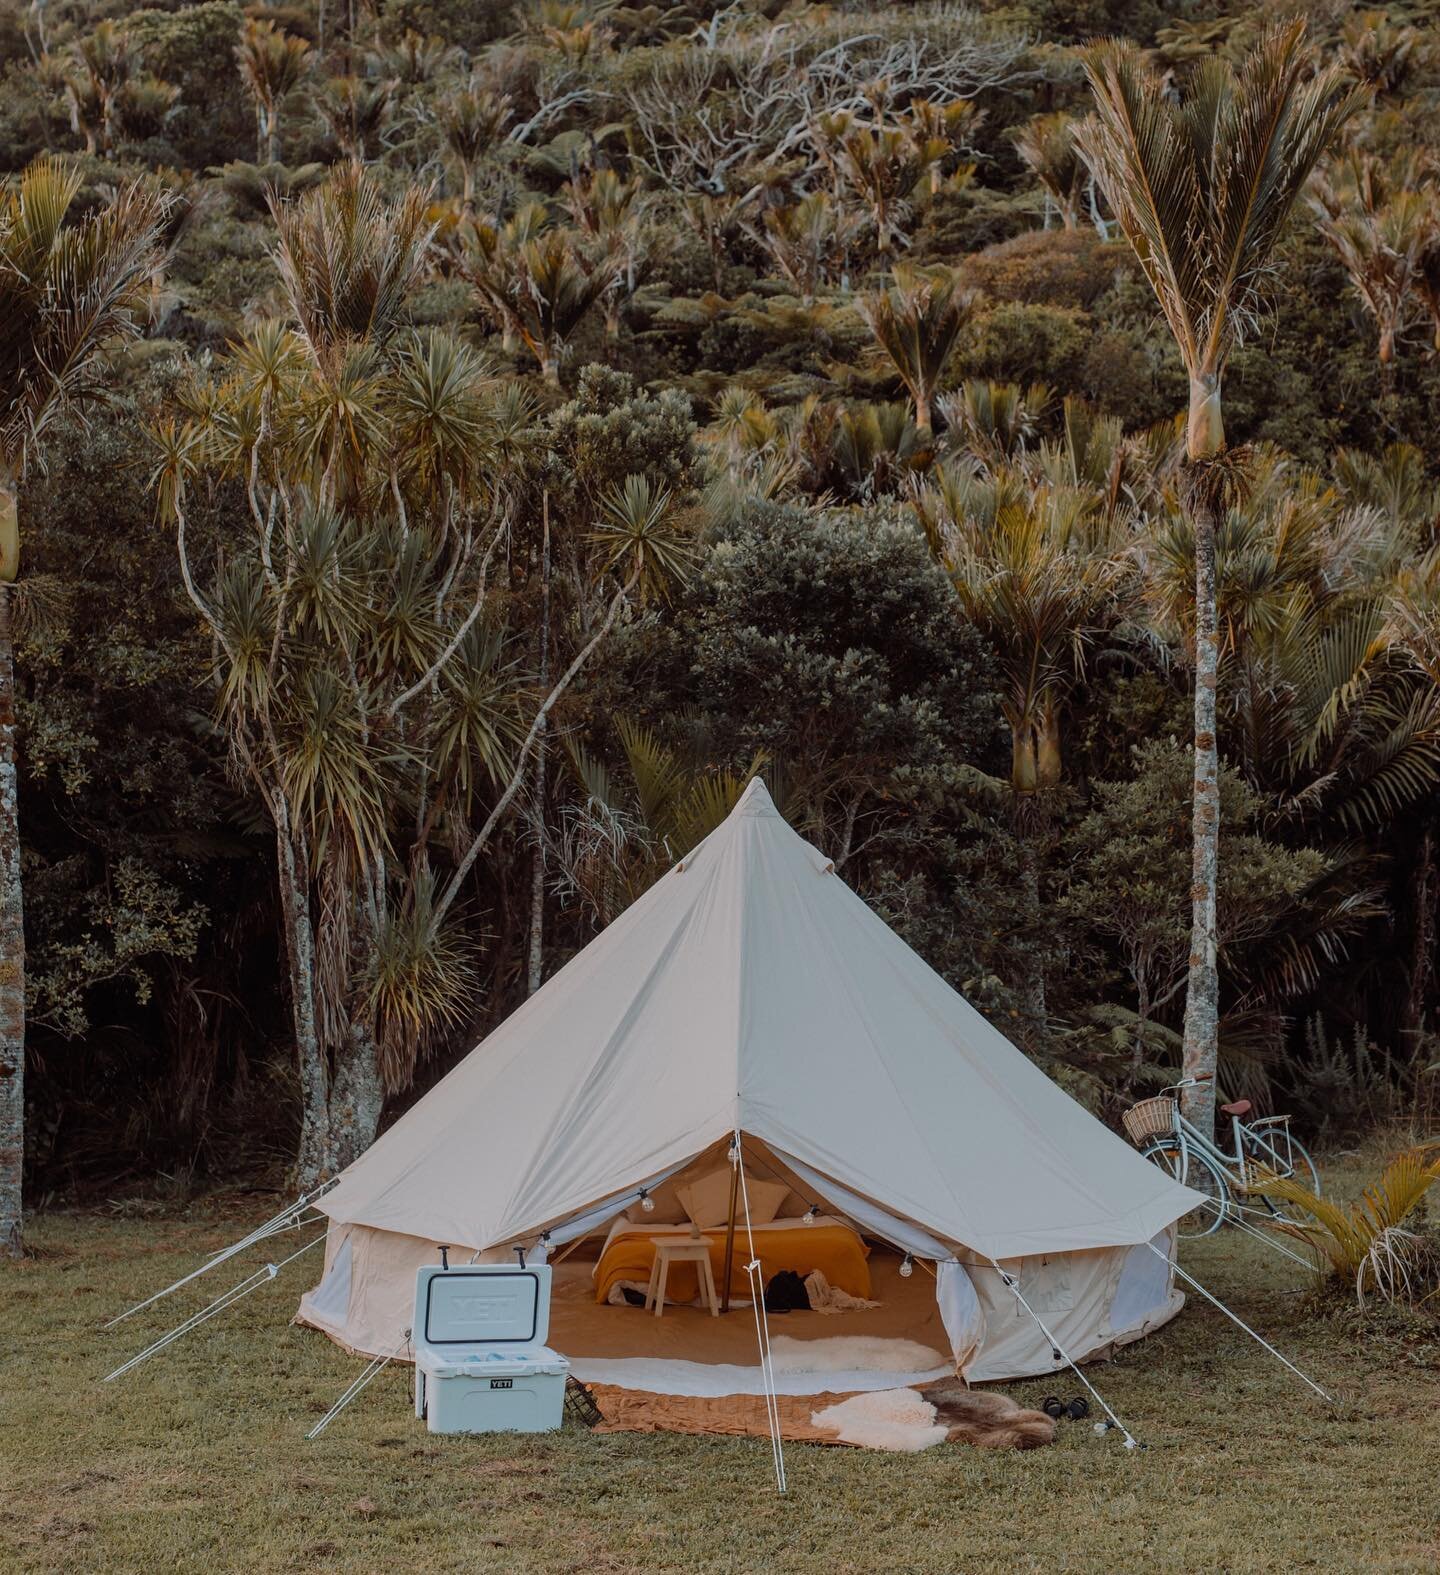 It&rsquo;s nearly the long weekend team ... NEARLY .
.
.
.
.

#nz  #tents #campinglife #tent #camping #campinginstyle #glampinghub #luxurycamping #glampinglife #kiwiwedding #nzglamping #canopycamping #kiwiroadtrip #belltent #yurt
#glamping #nature #o